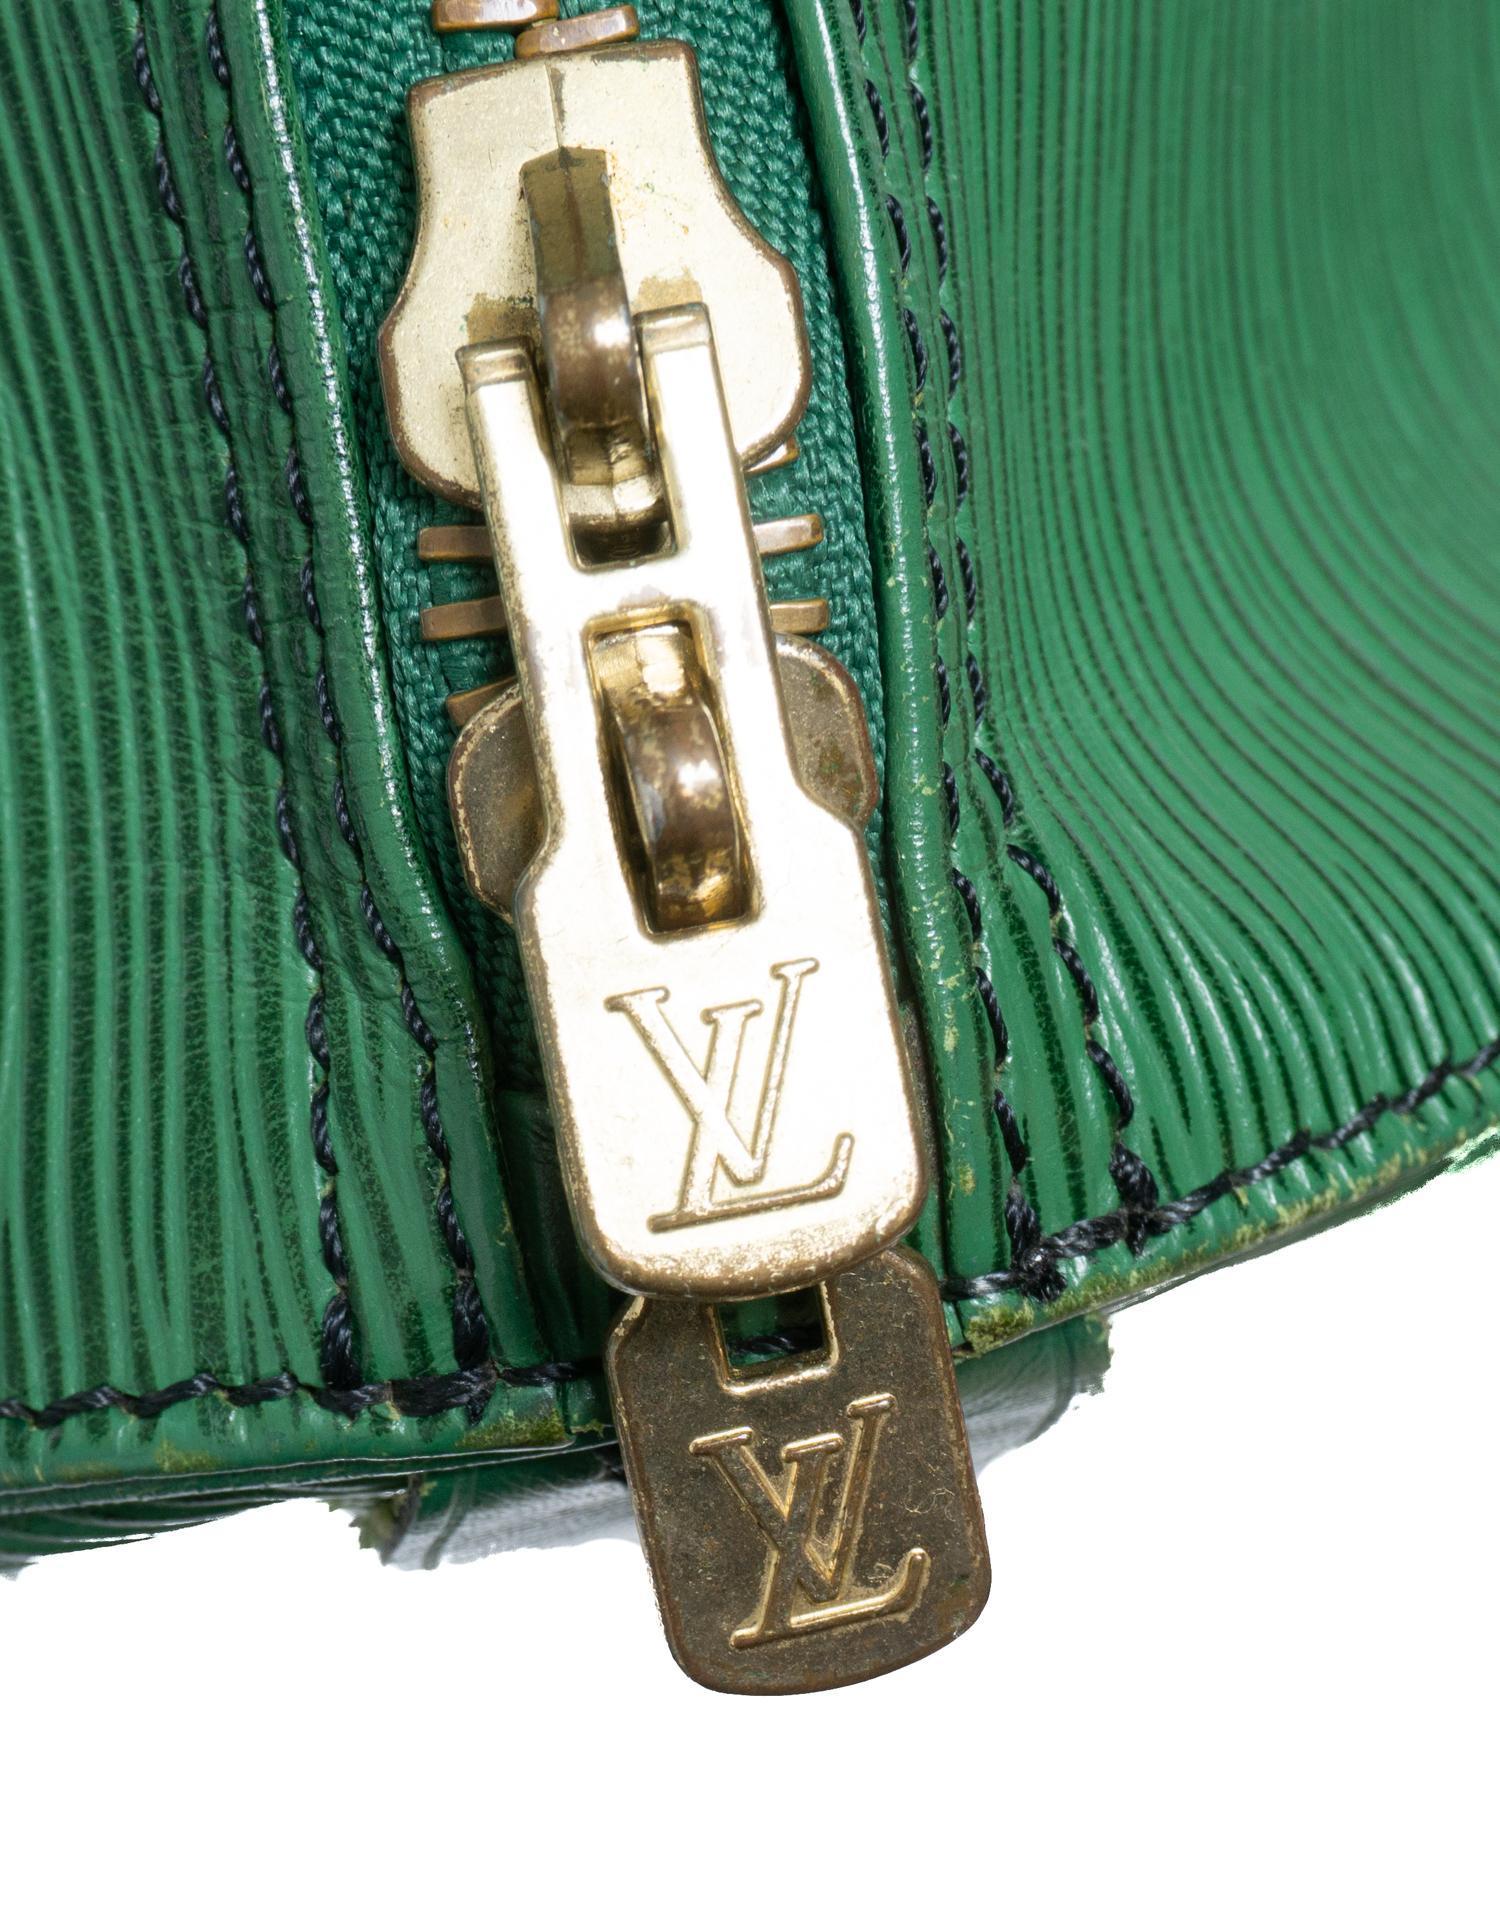 Sold at Auction: A Twin Handled Duffle Bag Marked Louis Vuitton